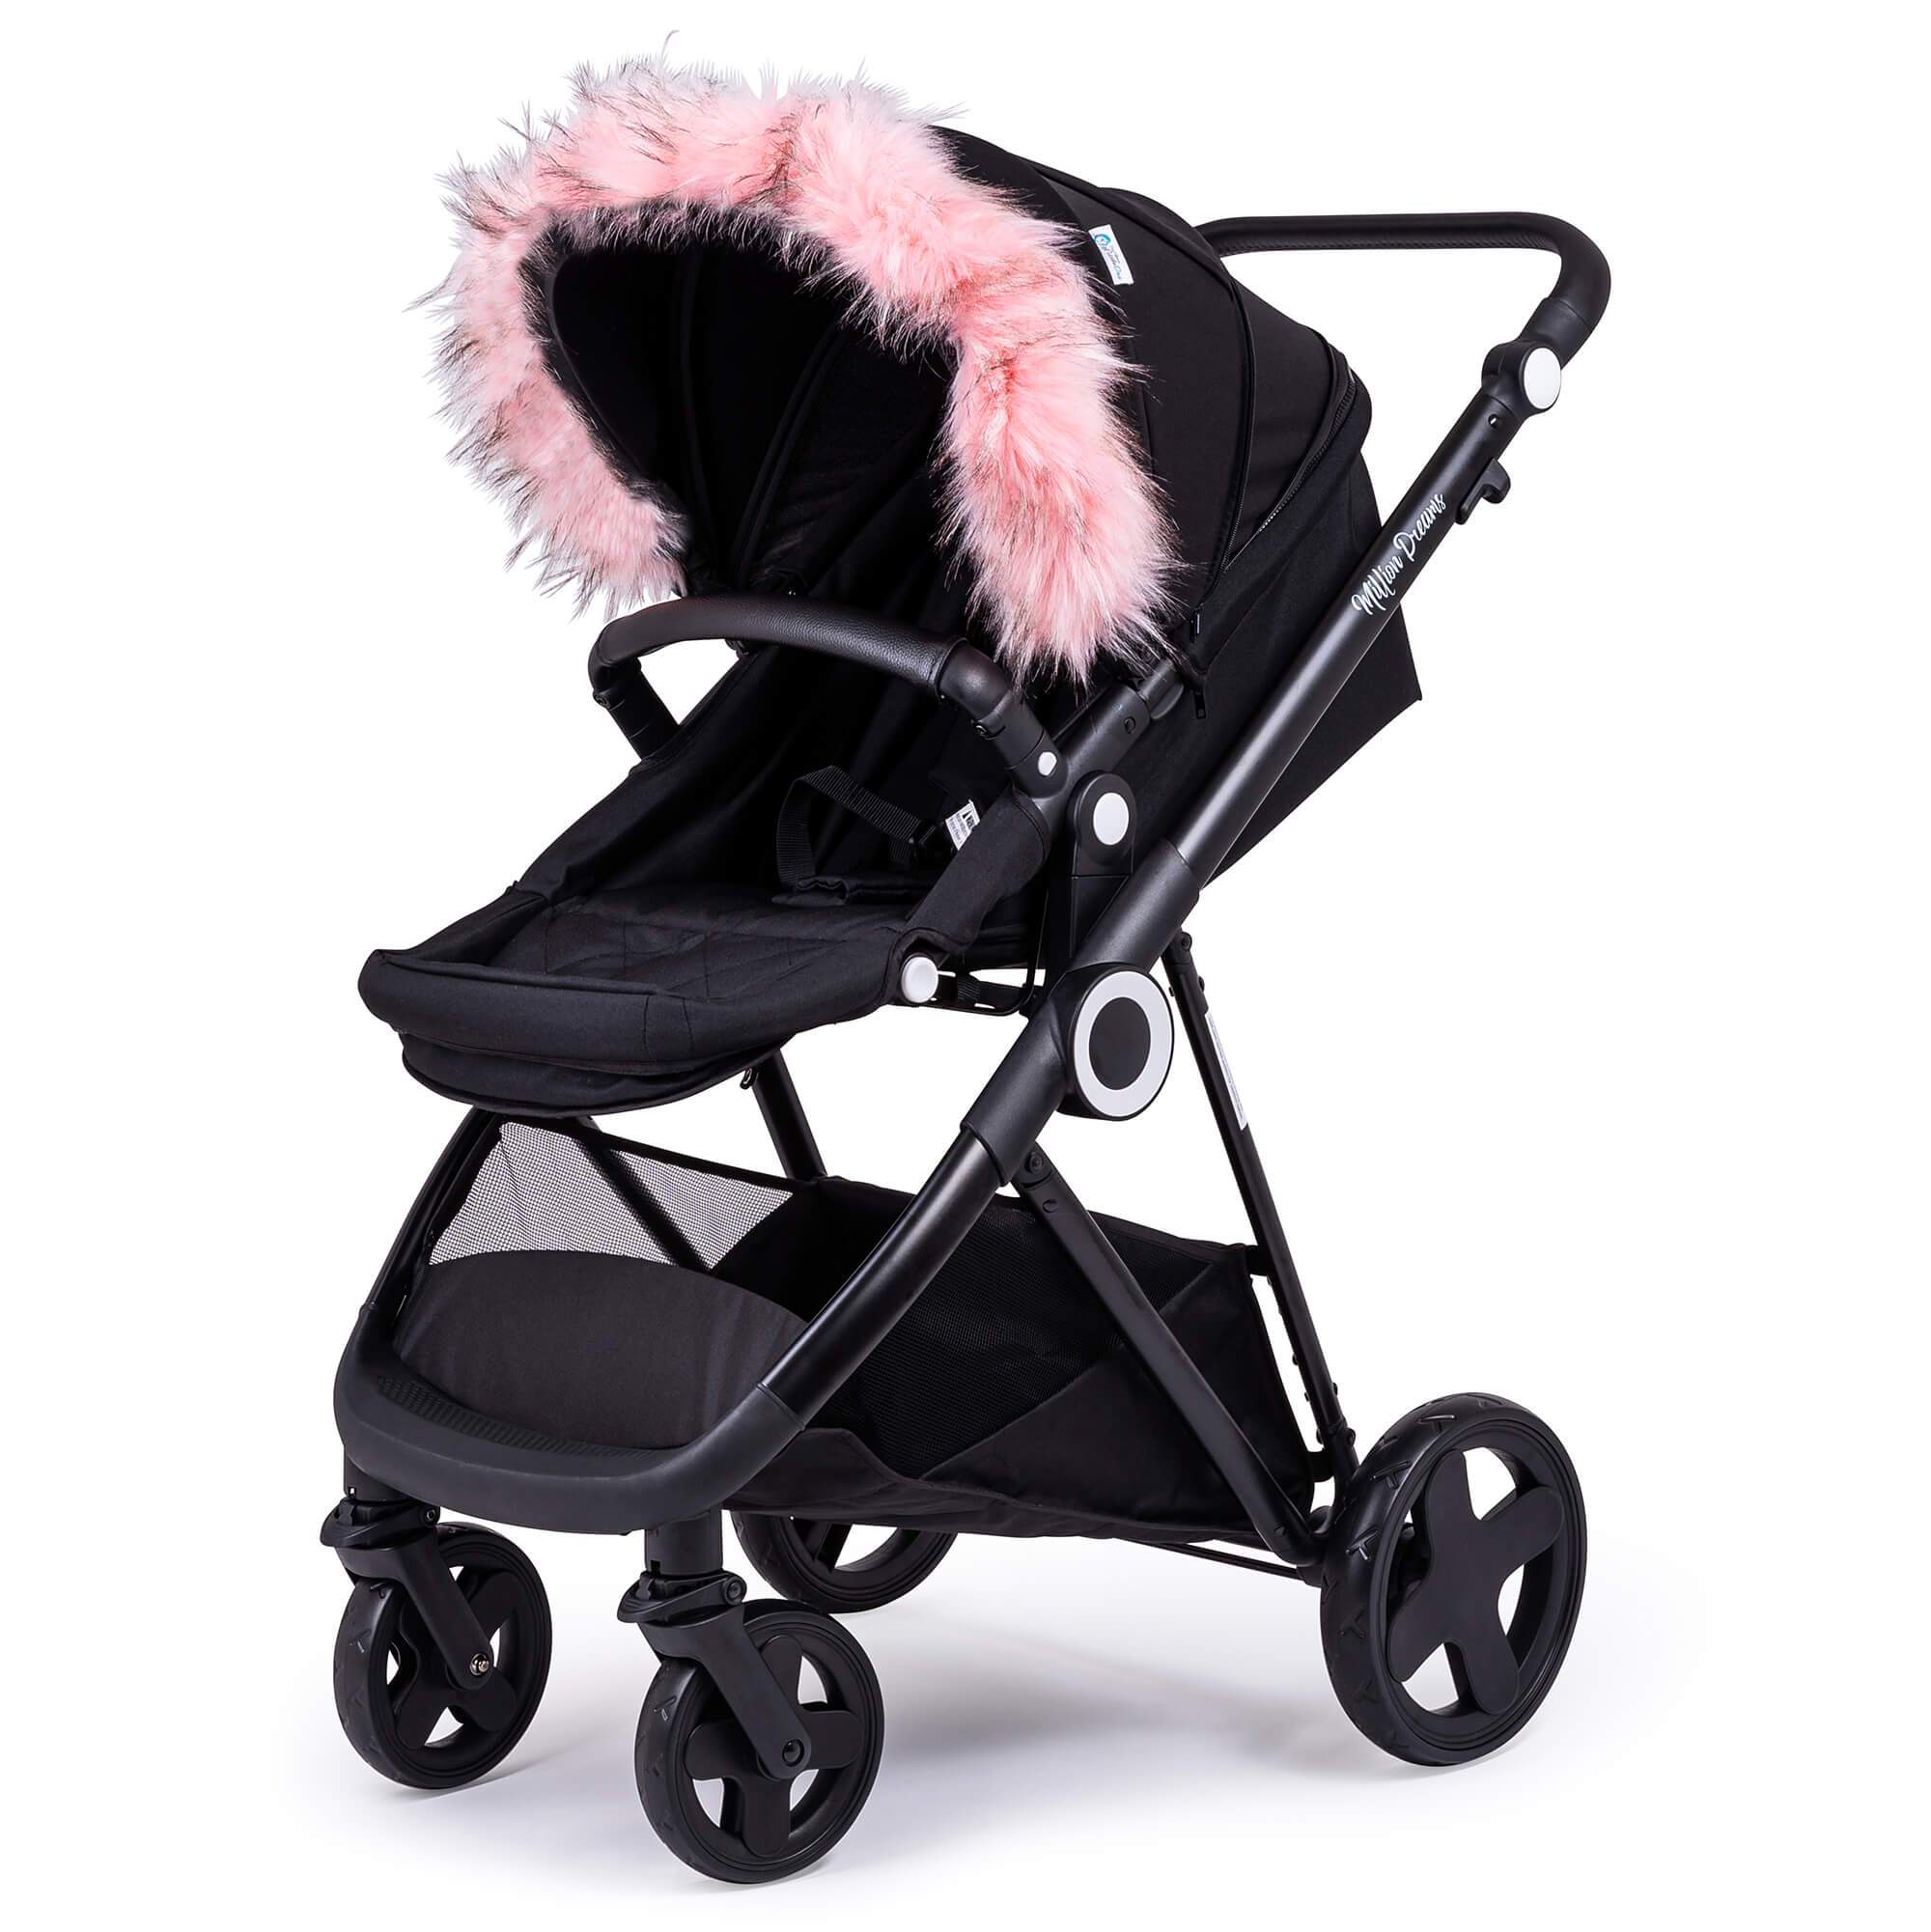 Pram Fur Hood Trim Attachment for Pushchair Compatible with Teutonia - Light Pink / Fits All Models | For Your Little One